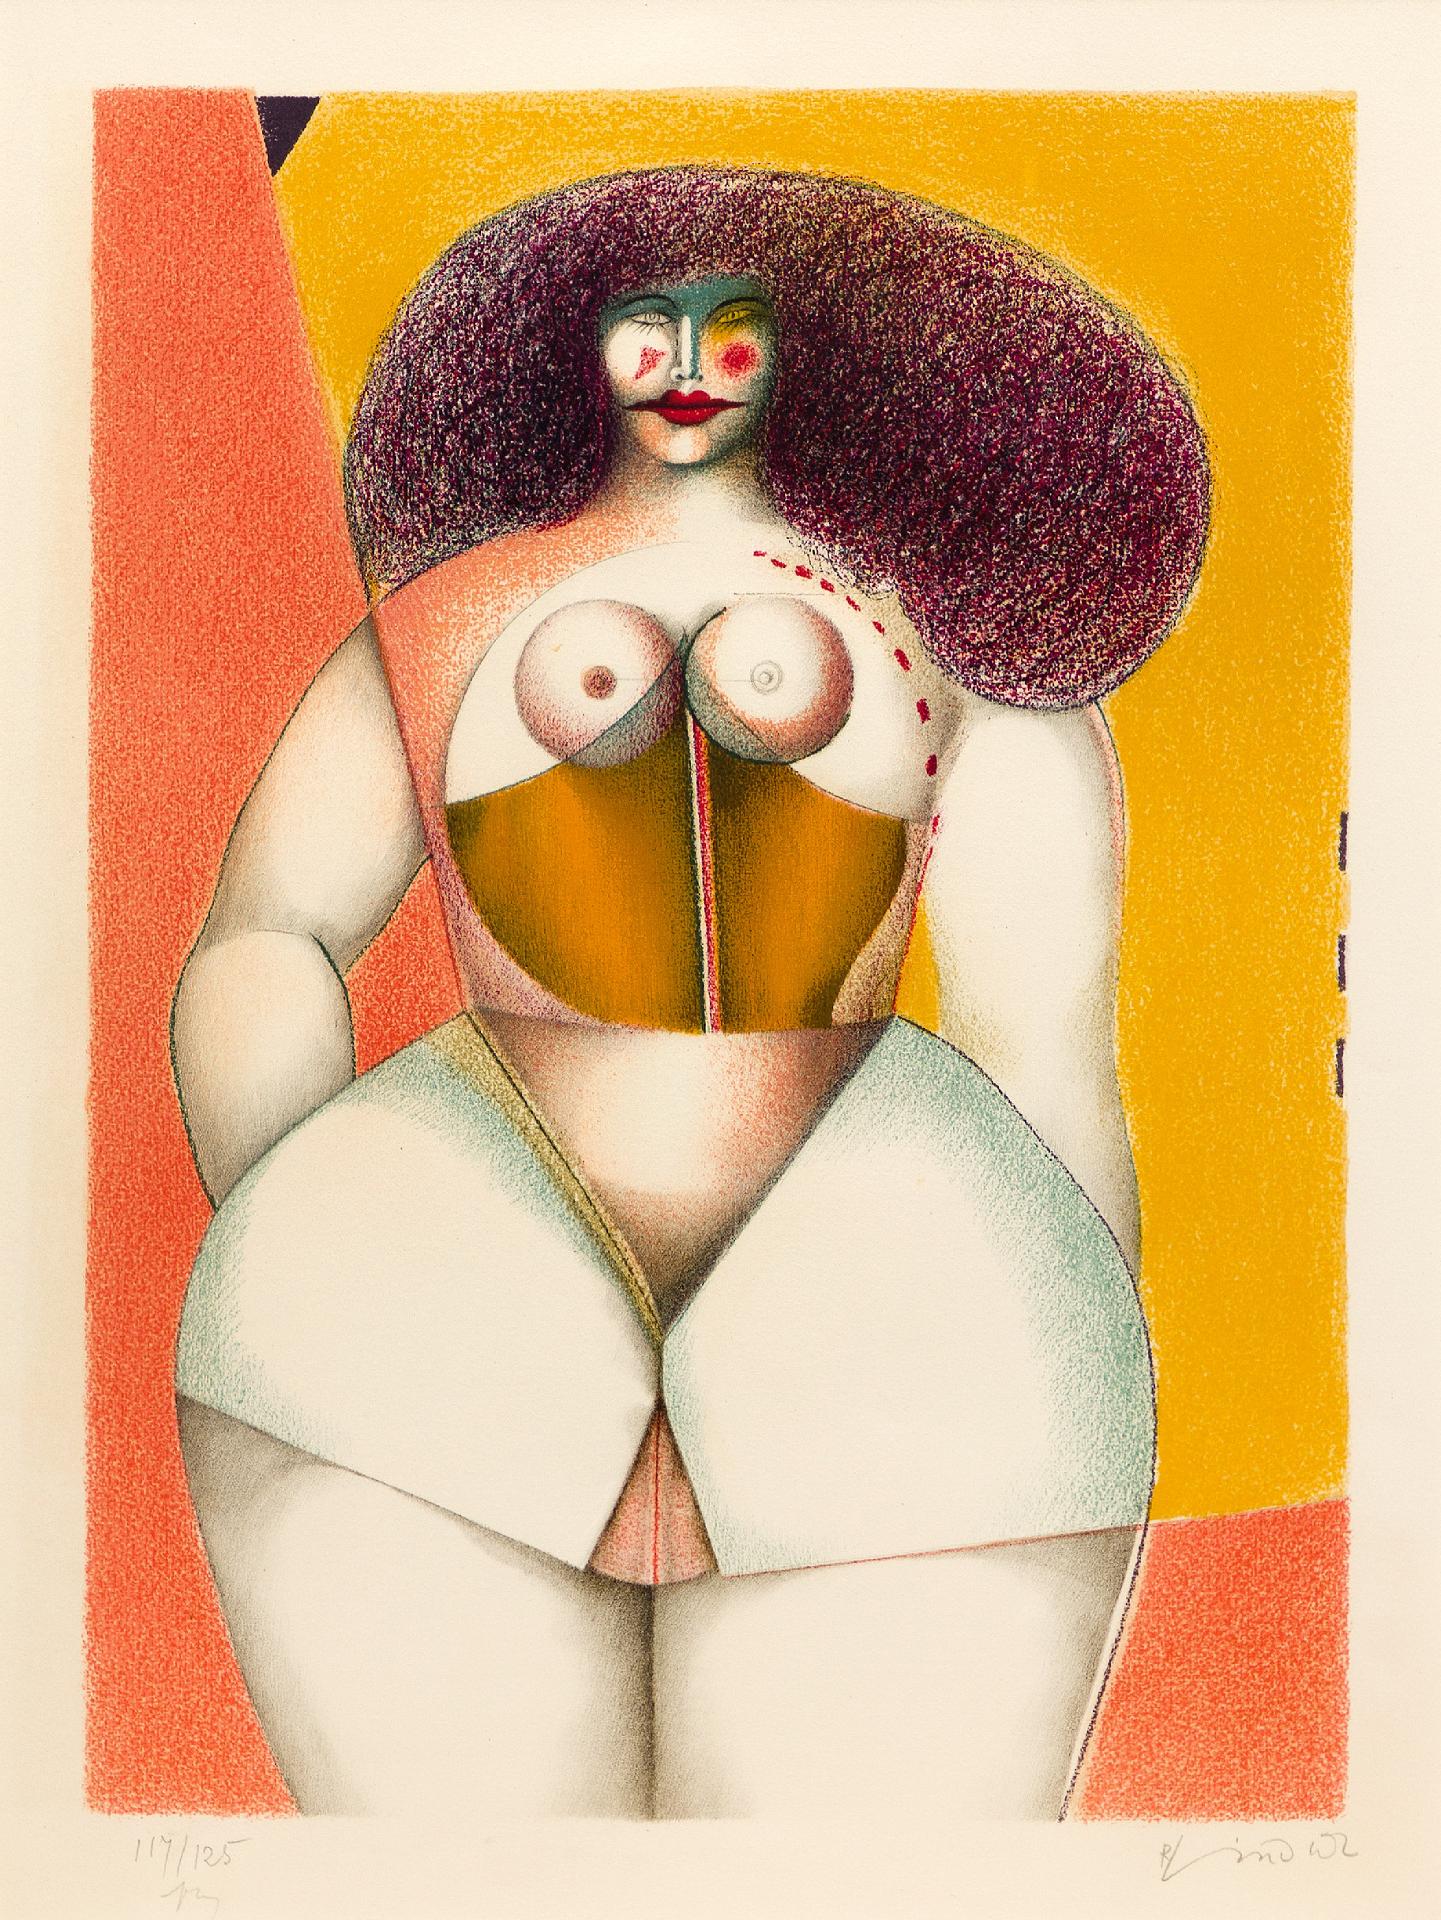 Richard Lindner (1901-1978) - Woman on Yellow Background, 1975